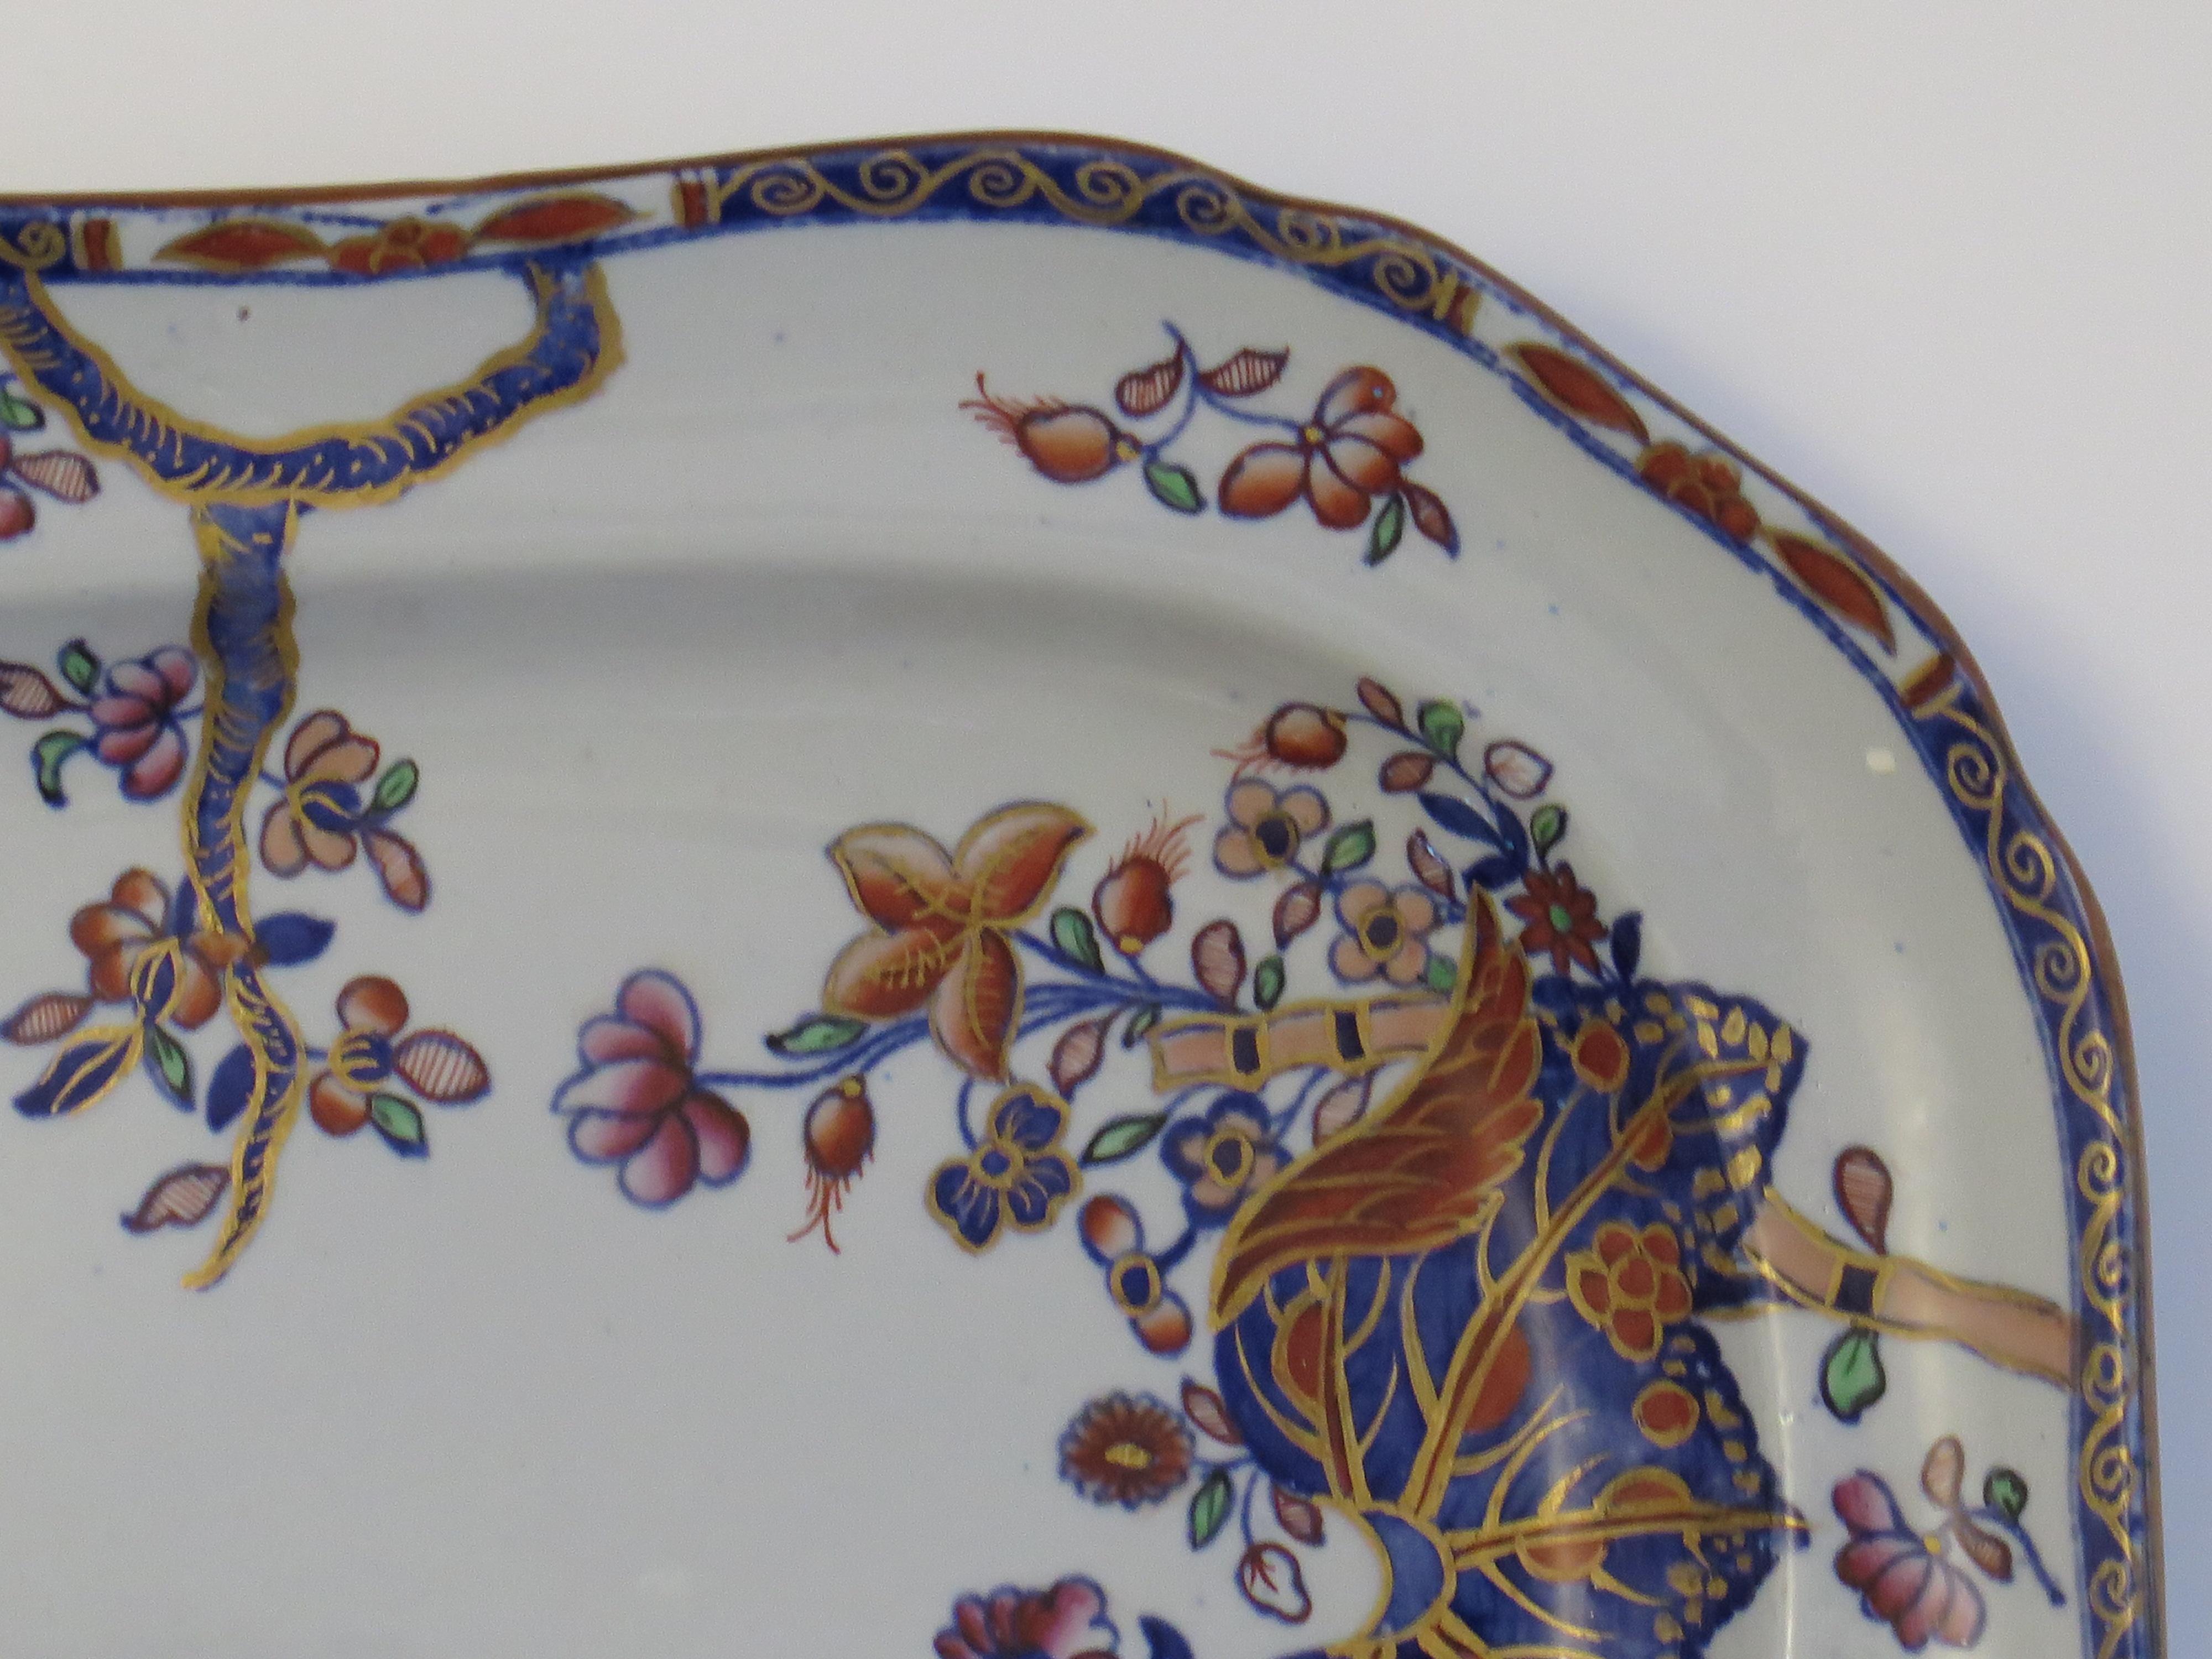 19th Century Copeland Stone China Dish or Platter in Tobacco Leaf Pattern No 2061, Mid 19th C